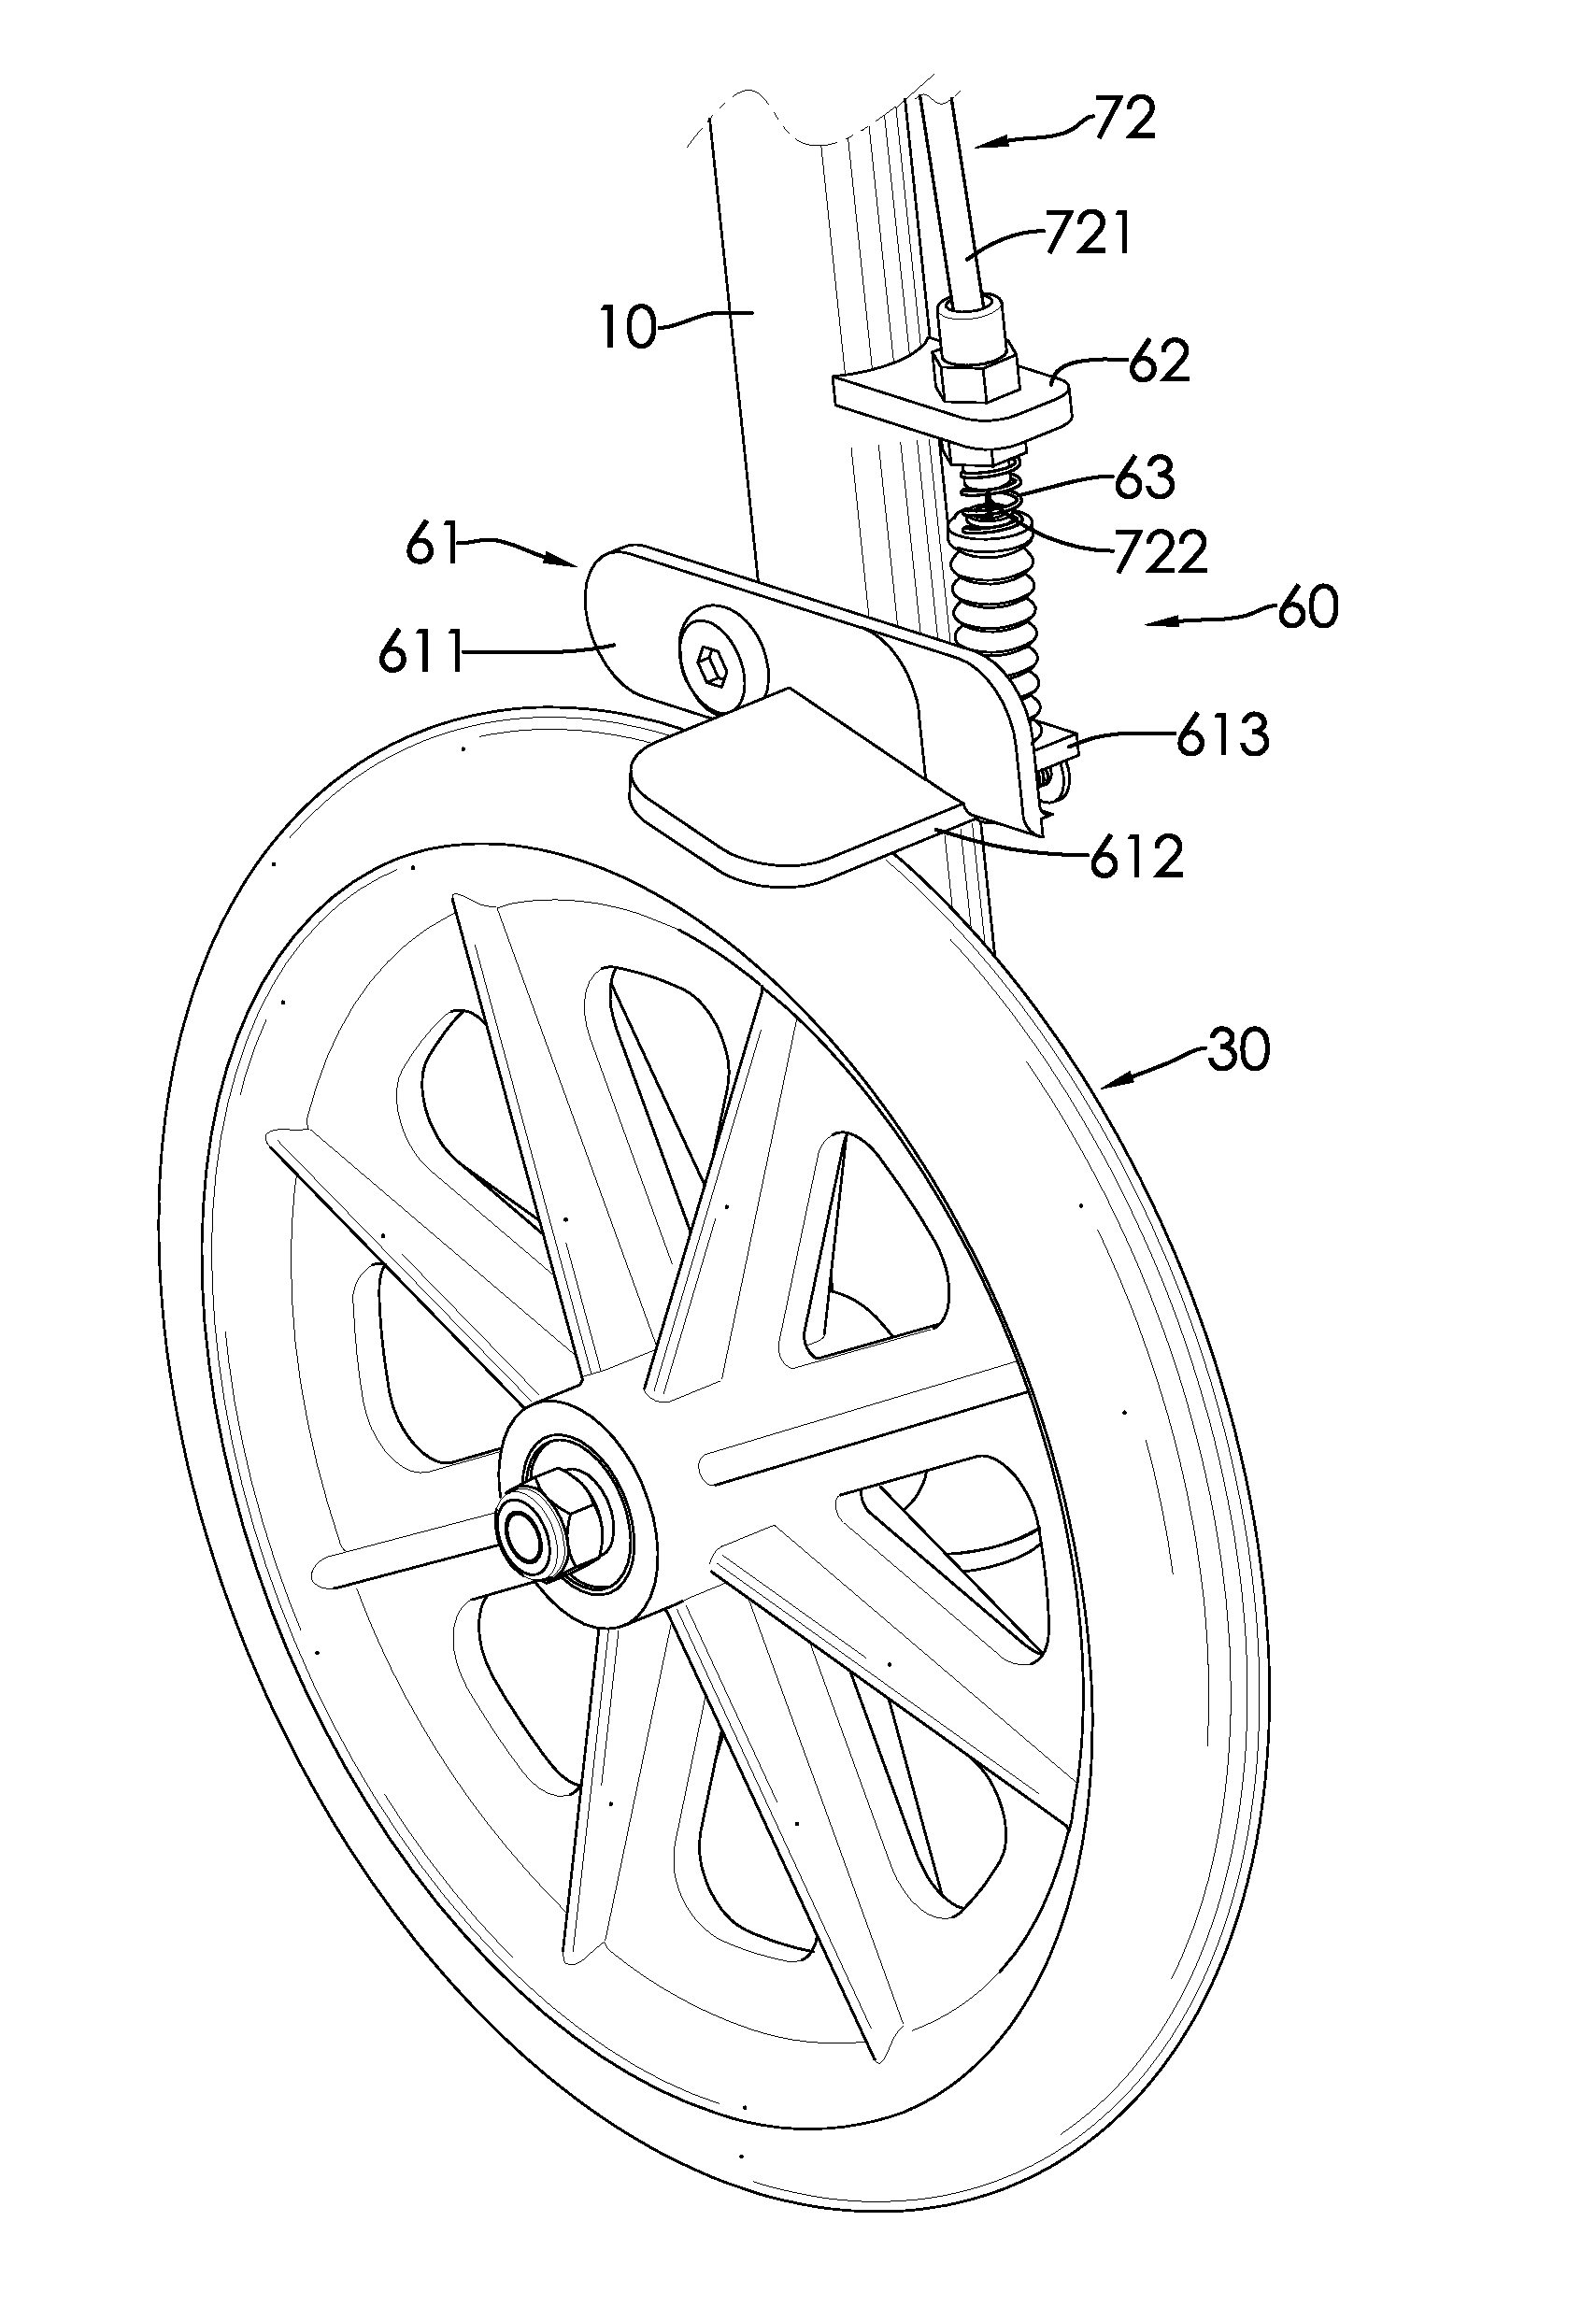 Braking system, rollator and transport chair with the same